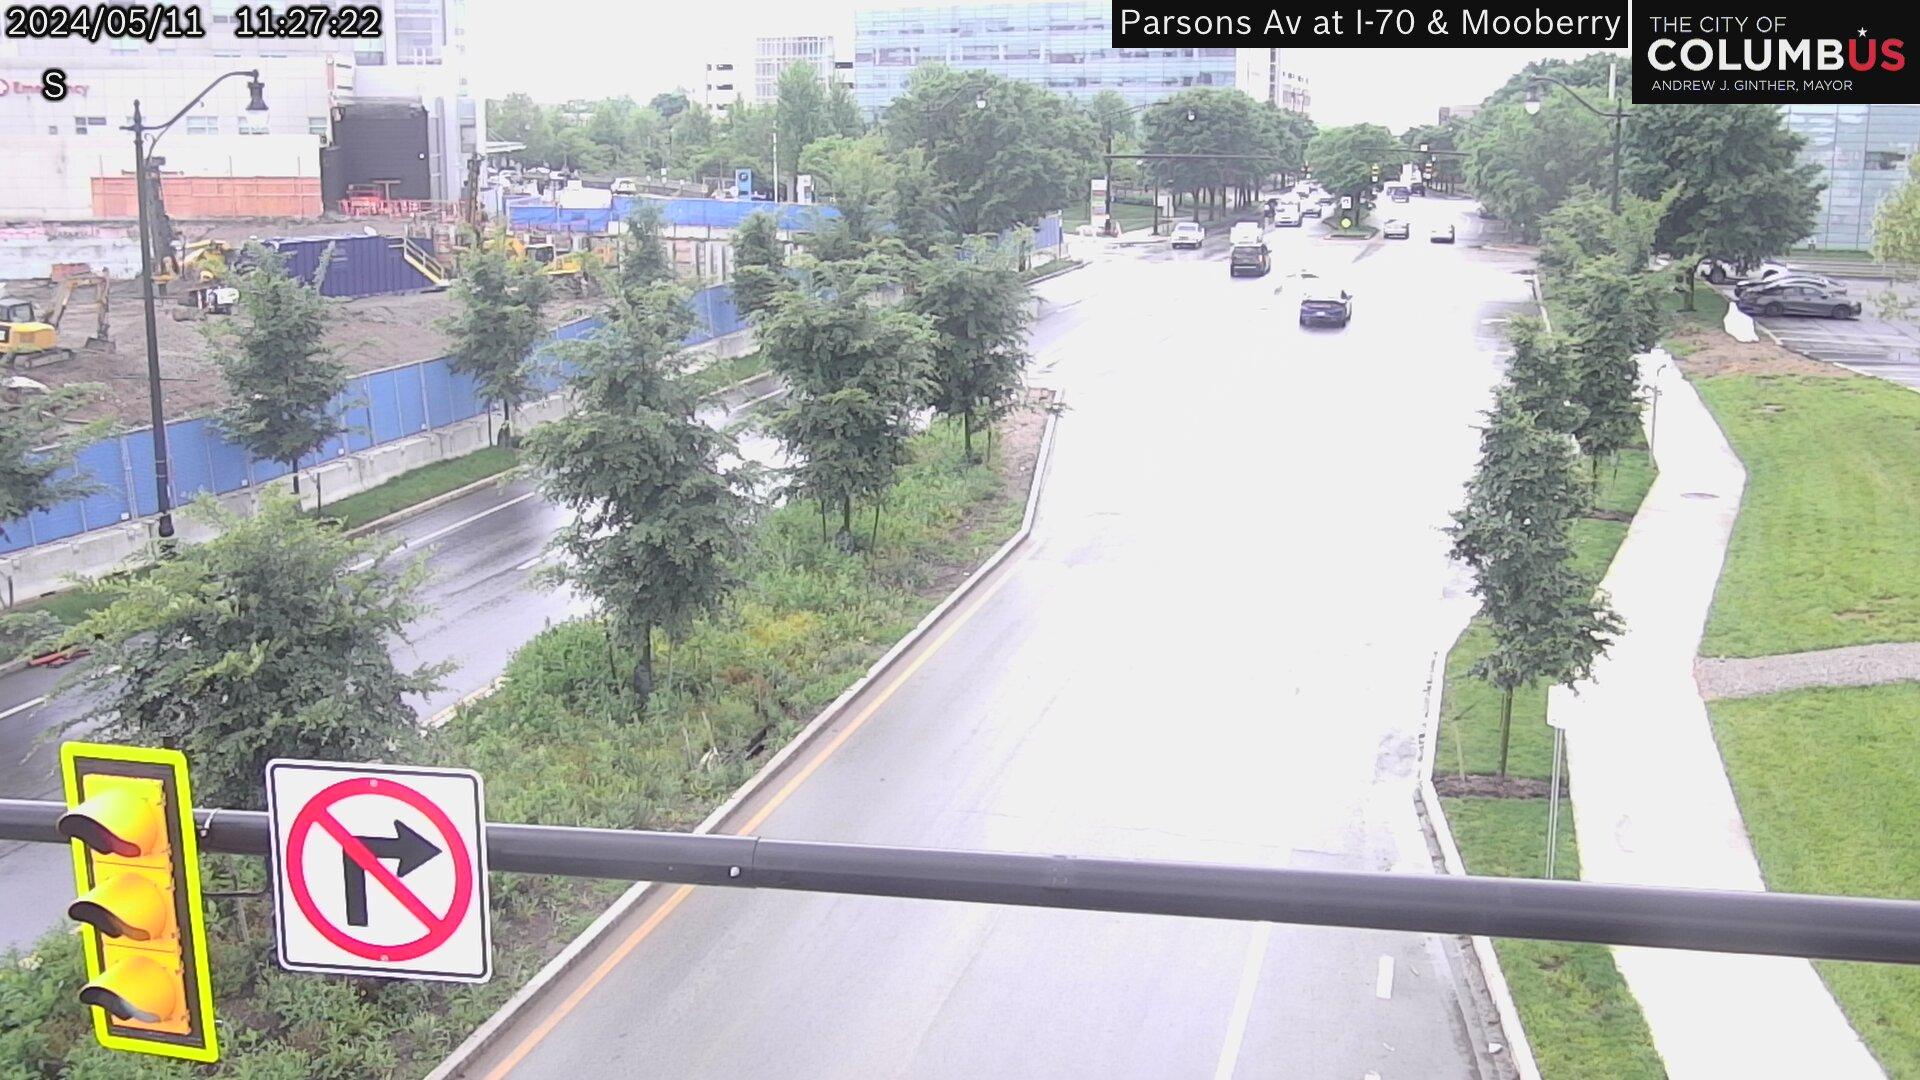 Traffic Cam Livingston Park: City of Columbus) I-70 EB Off Ramp & Mooberry St at Parsons Ave Player